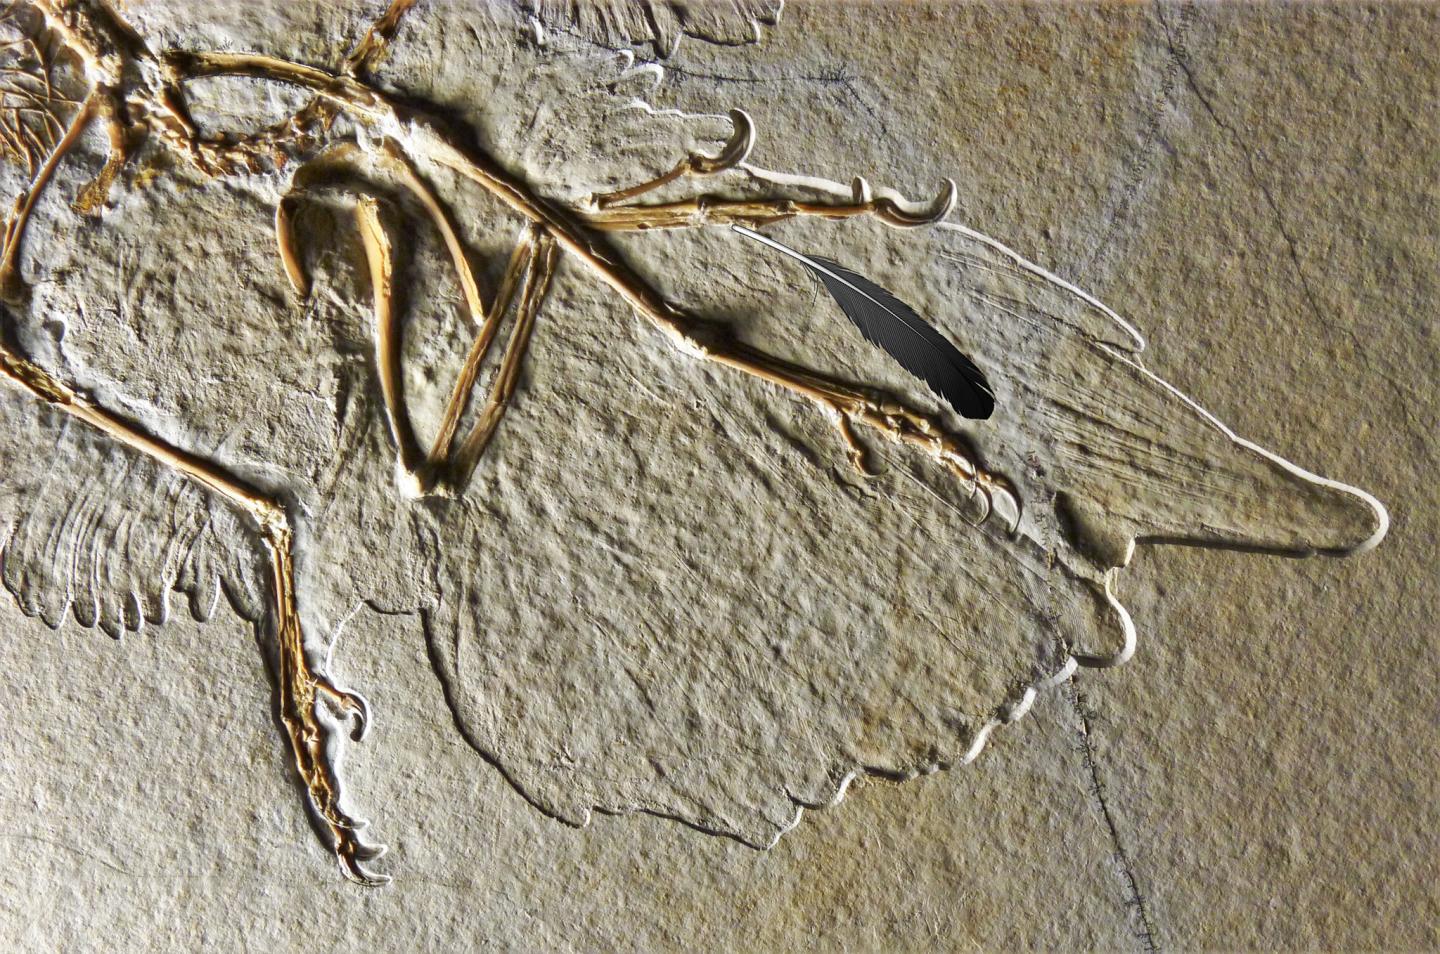 Archaeopteryx Fossil with Reconstructed Feather